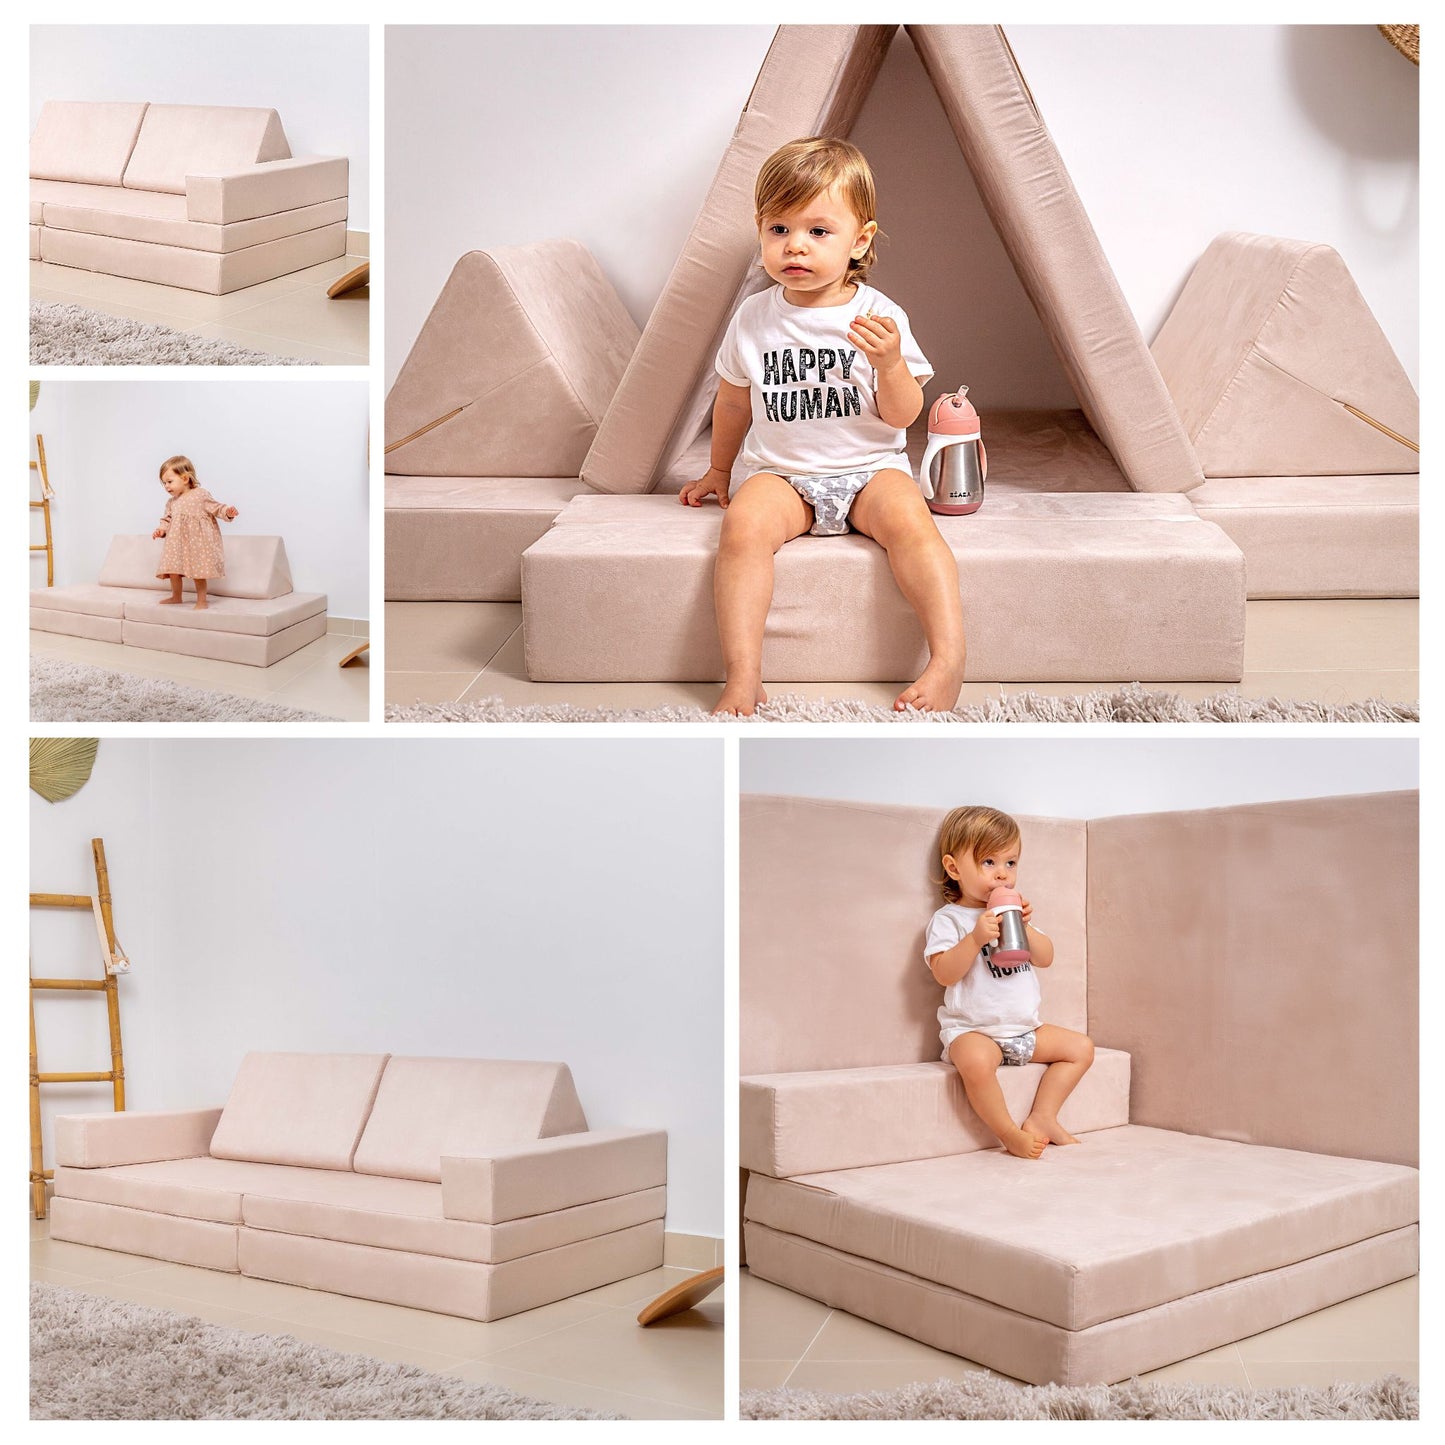 best play couch dubai, soft play sofa set buy, childrens play, couch in dubai, play kids sofa bed, play pit couch in dubai, kisd pillow sets